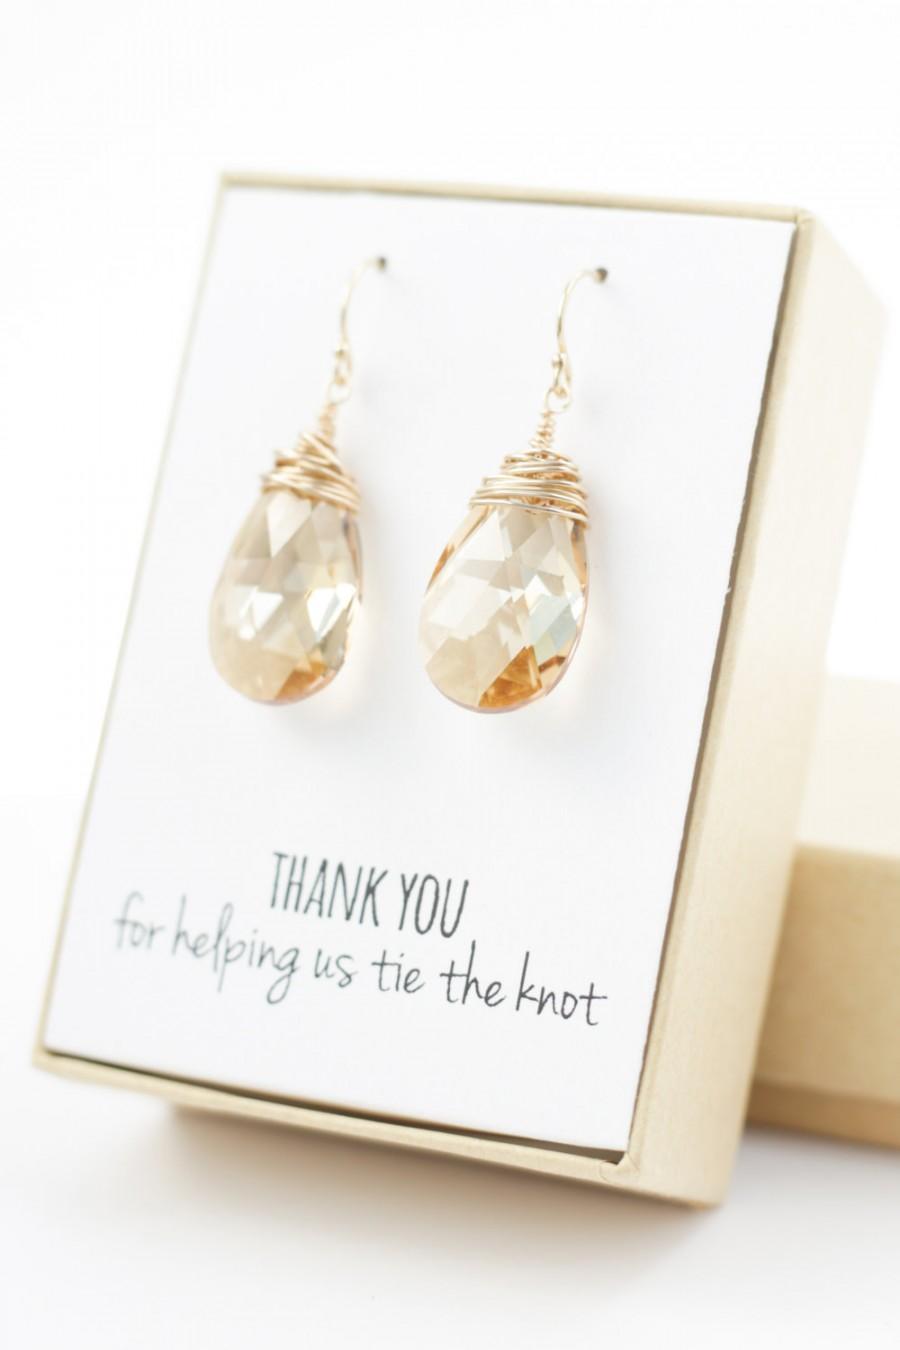 Hochzeit - Champagne Gold Swarovski Crystal Earrings - Large Crystal Earrings - Champagne Swarovski Earrings - Wire-Wrapped - Bridesmaid Earrings Gift